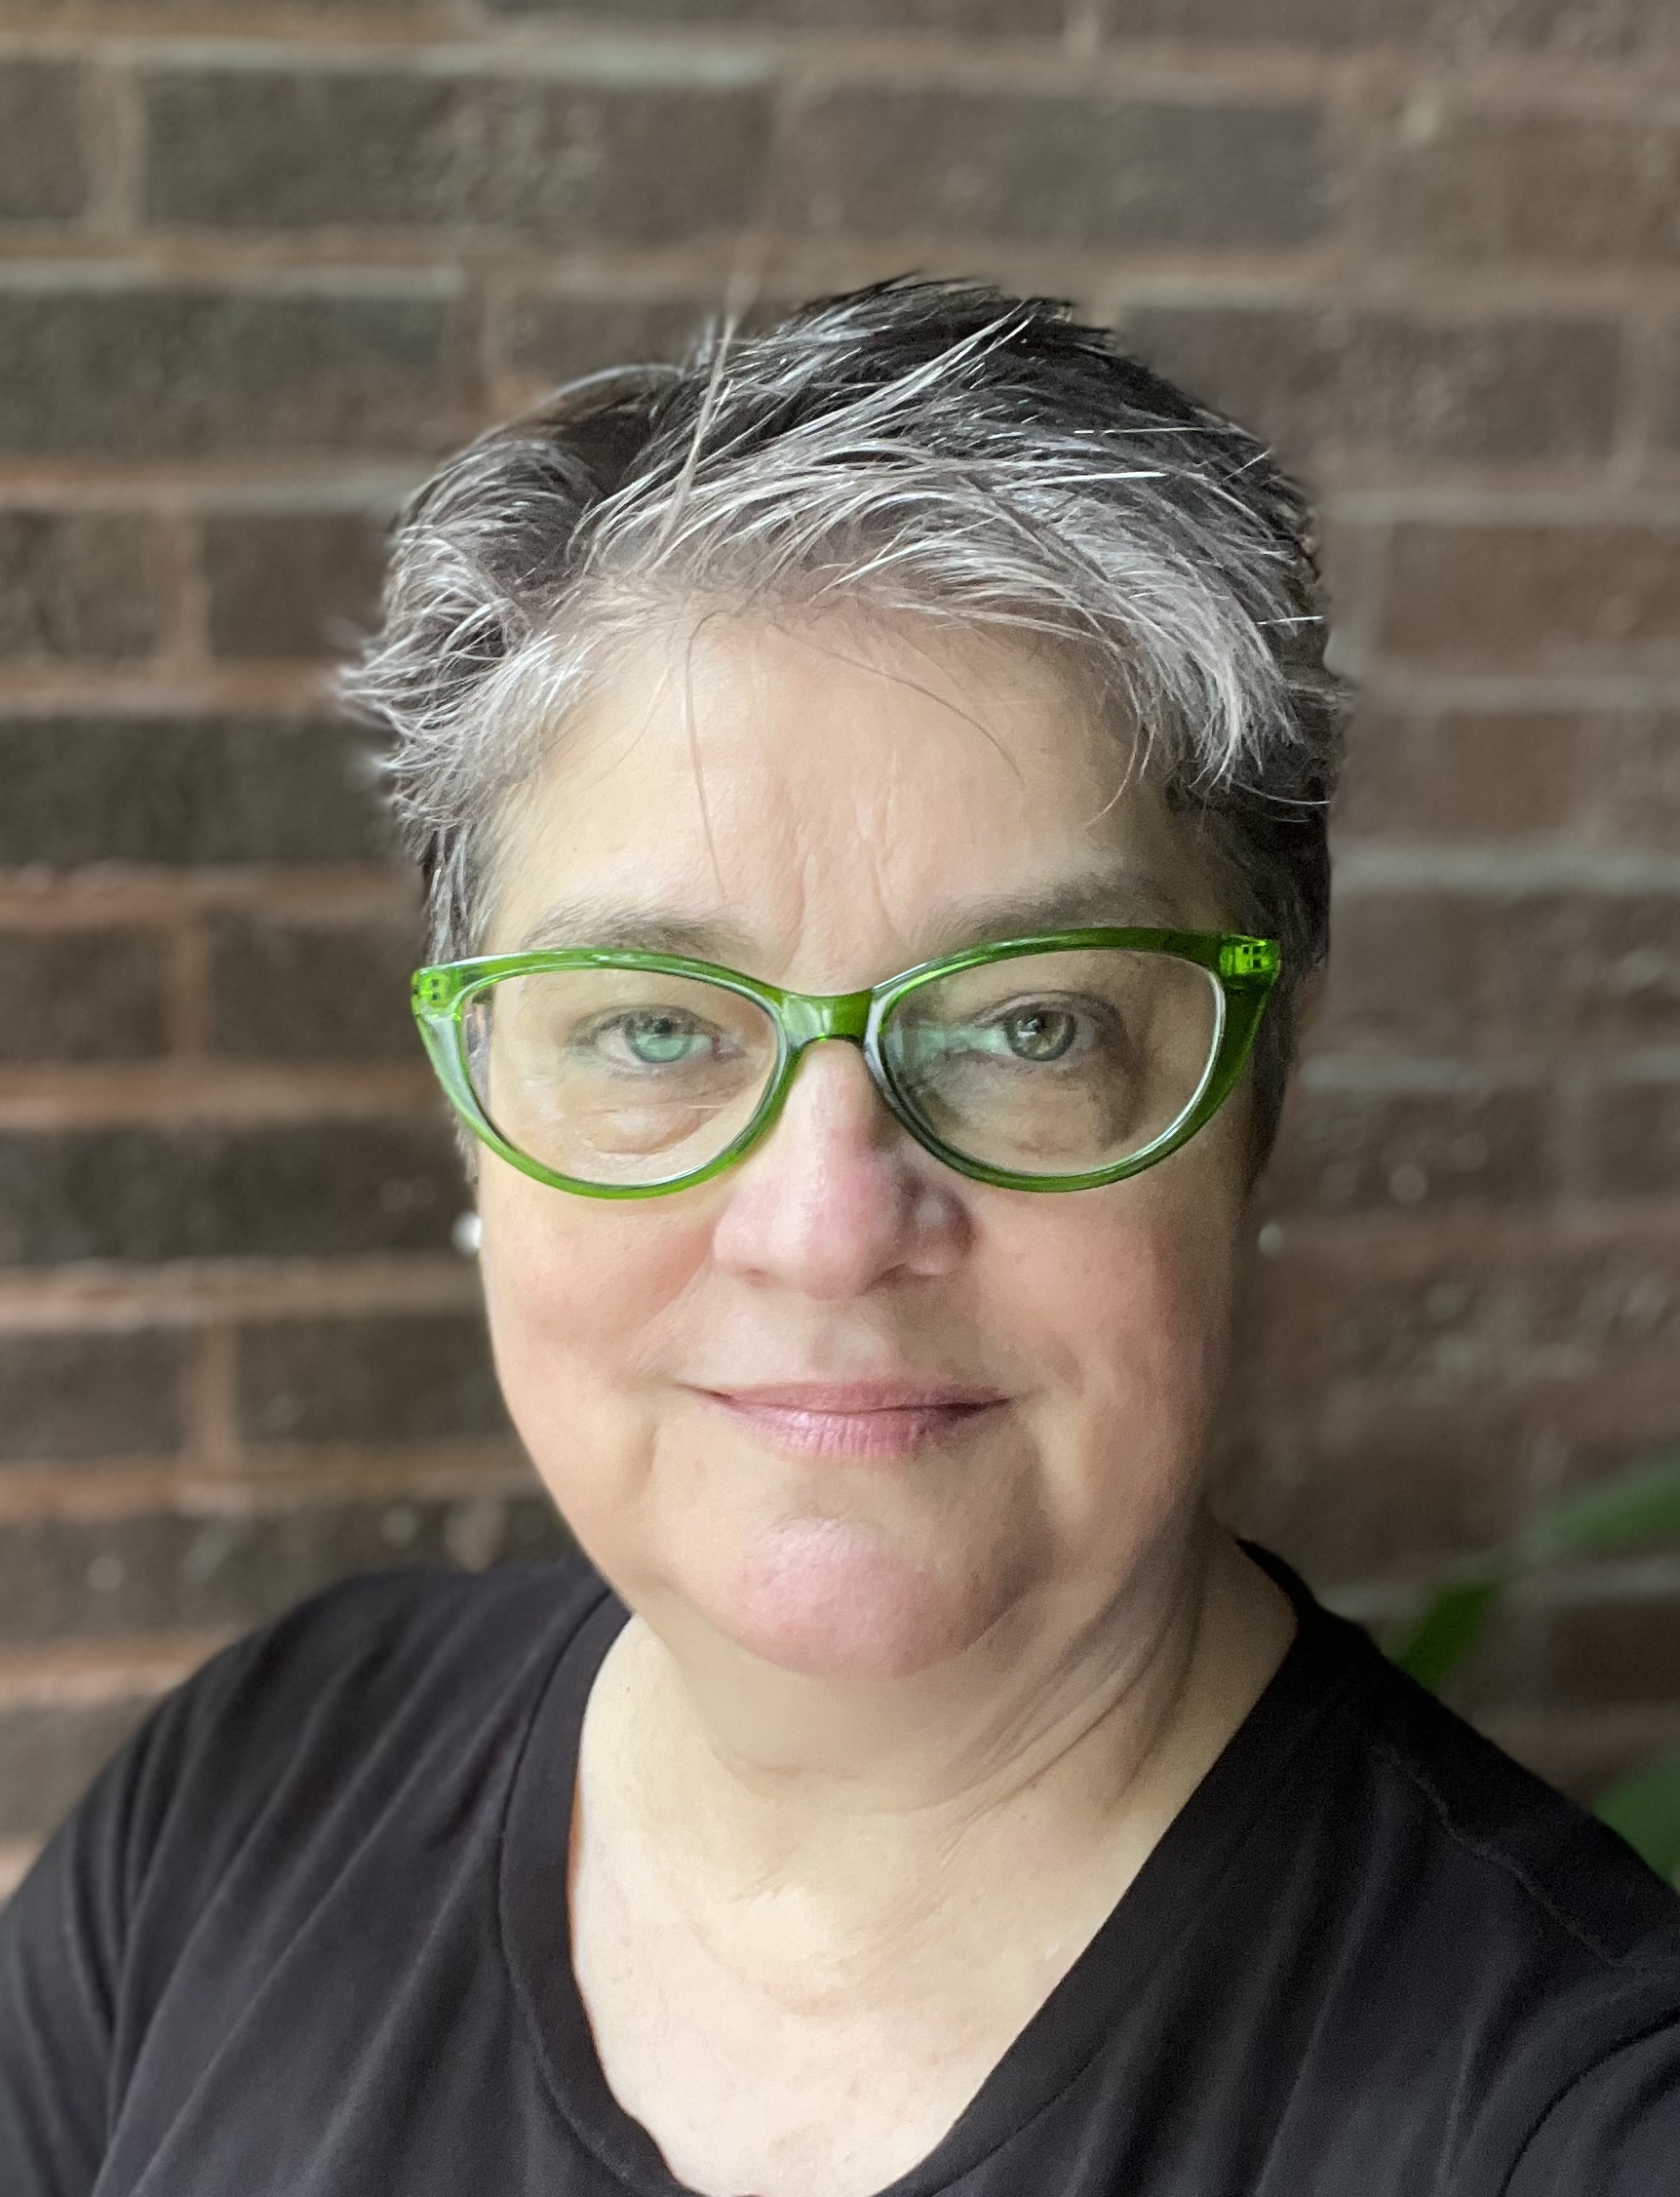 Photo of a woman with short grey hair and green glasses.